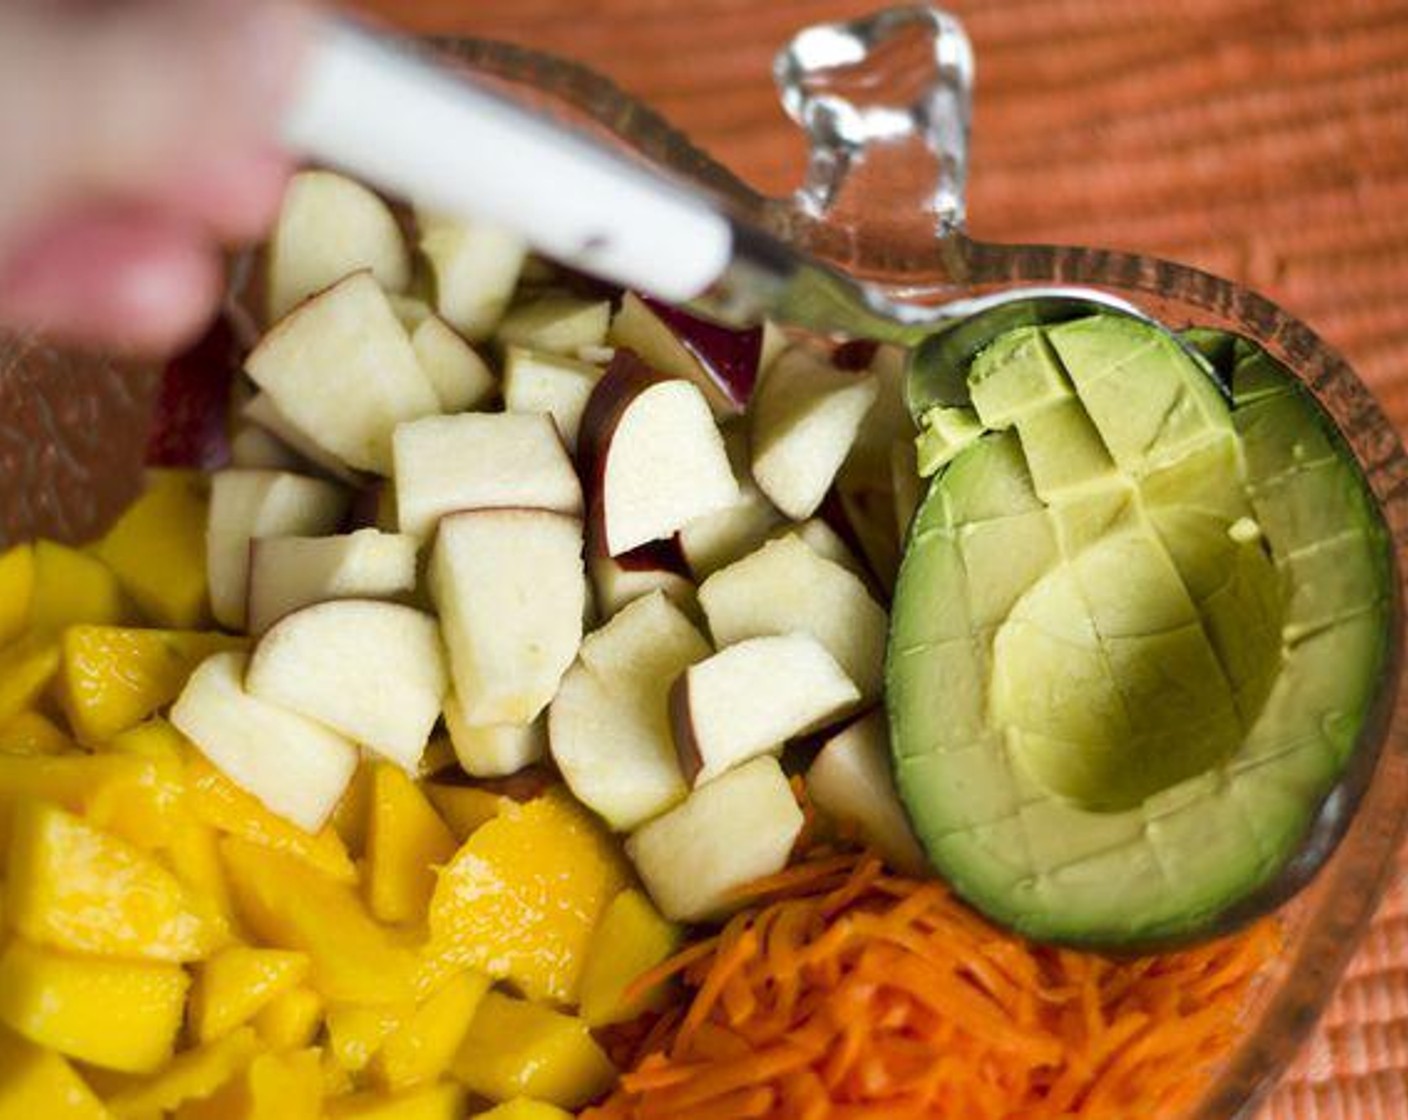 step 2 Toss together the Avocado (1) cut into 1/2-inch dices, Apple (1), Mangoes (2), Carrots (3), Salad Greens (8 cups), and dressing.